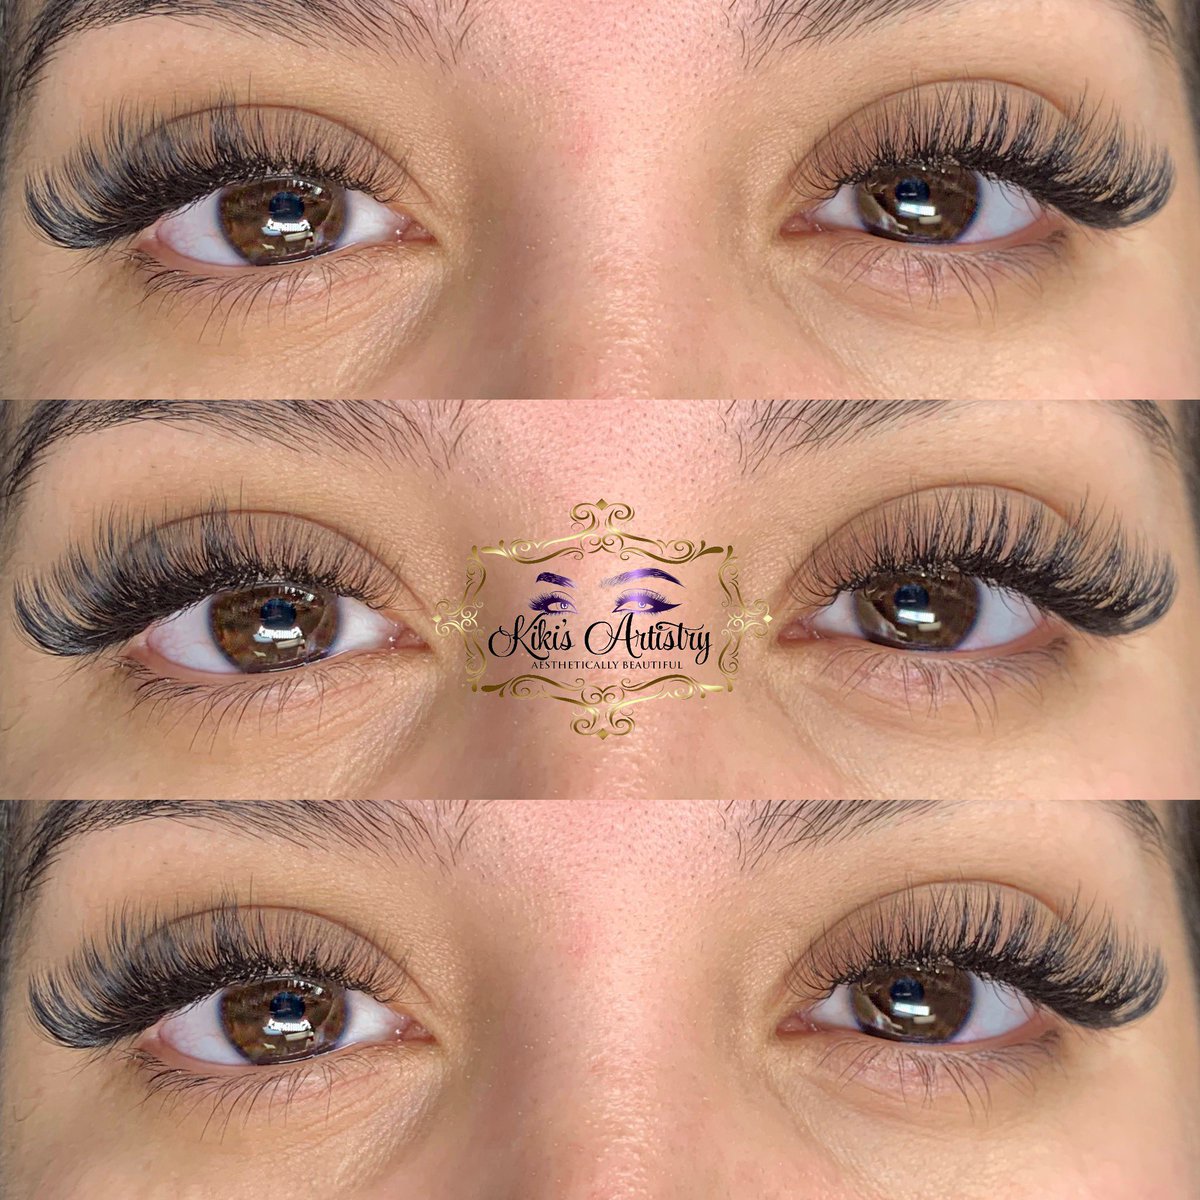 Dont forget to book your appointments for prom! 
⚜️Full Volume Set $100 (Limited Time, Original $125!)⚜️
💎3 Week Refills $75💎
#lashes #lashextenstions #prom2k19 #prommakeup #pearlandlashes #pasadenalashes